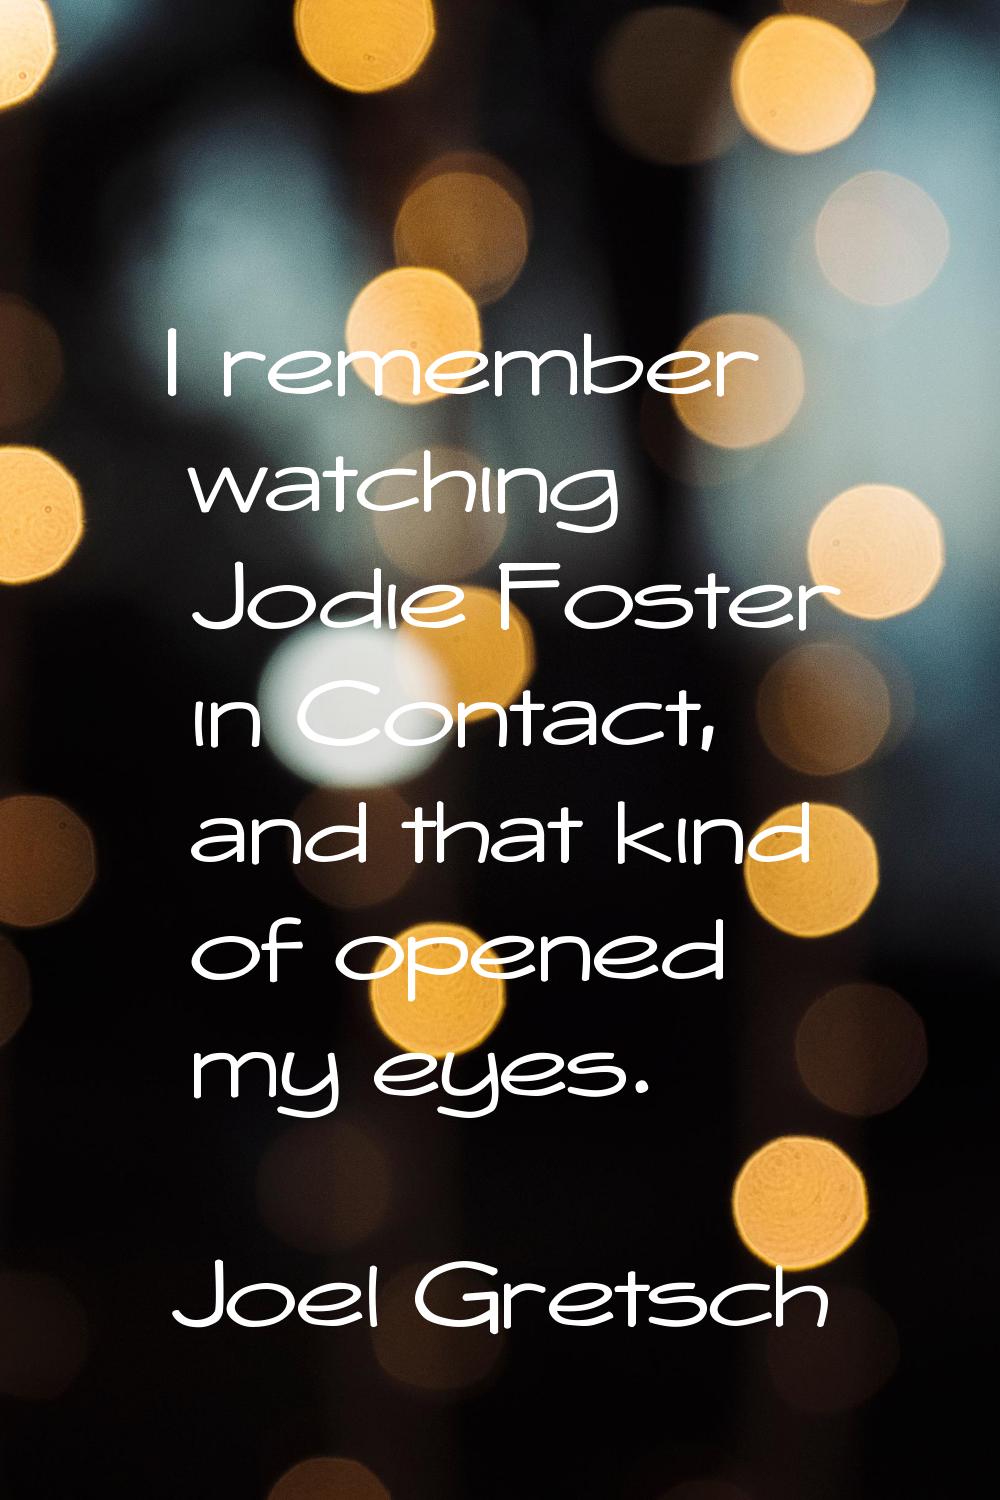 I remember watching Jodie Foster in Contact, and that kind of opened my eyes.